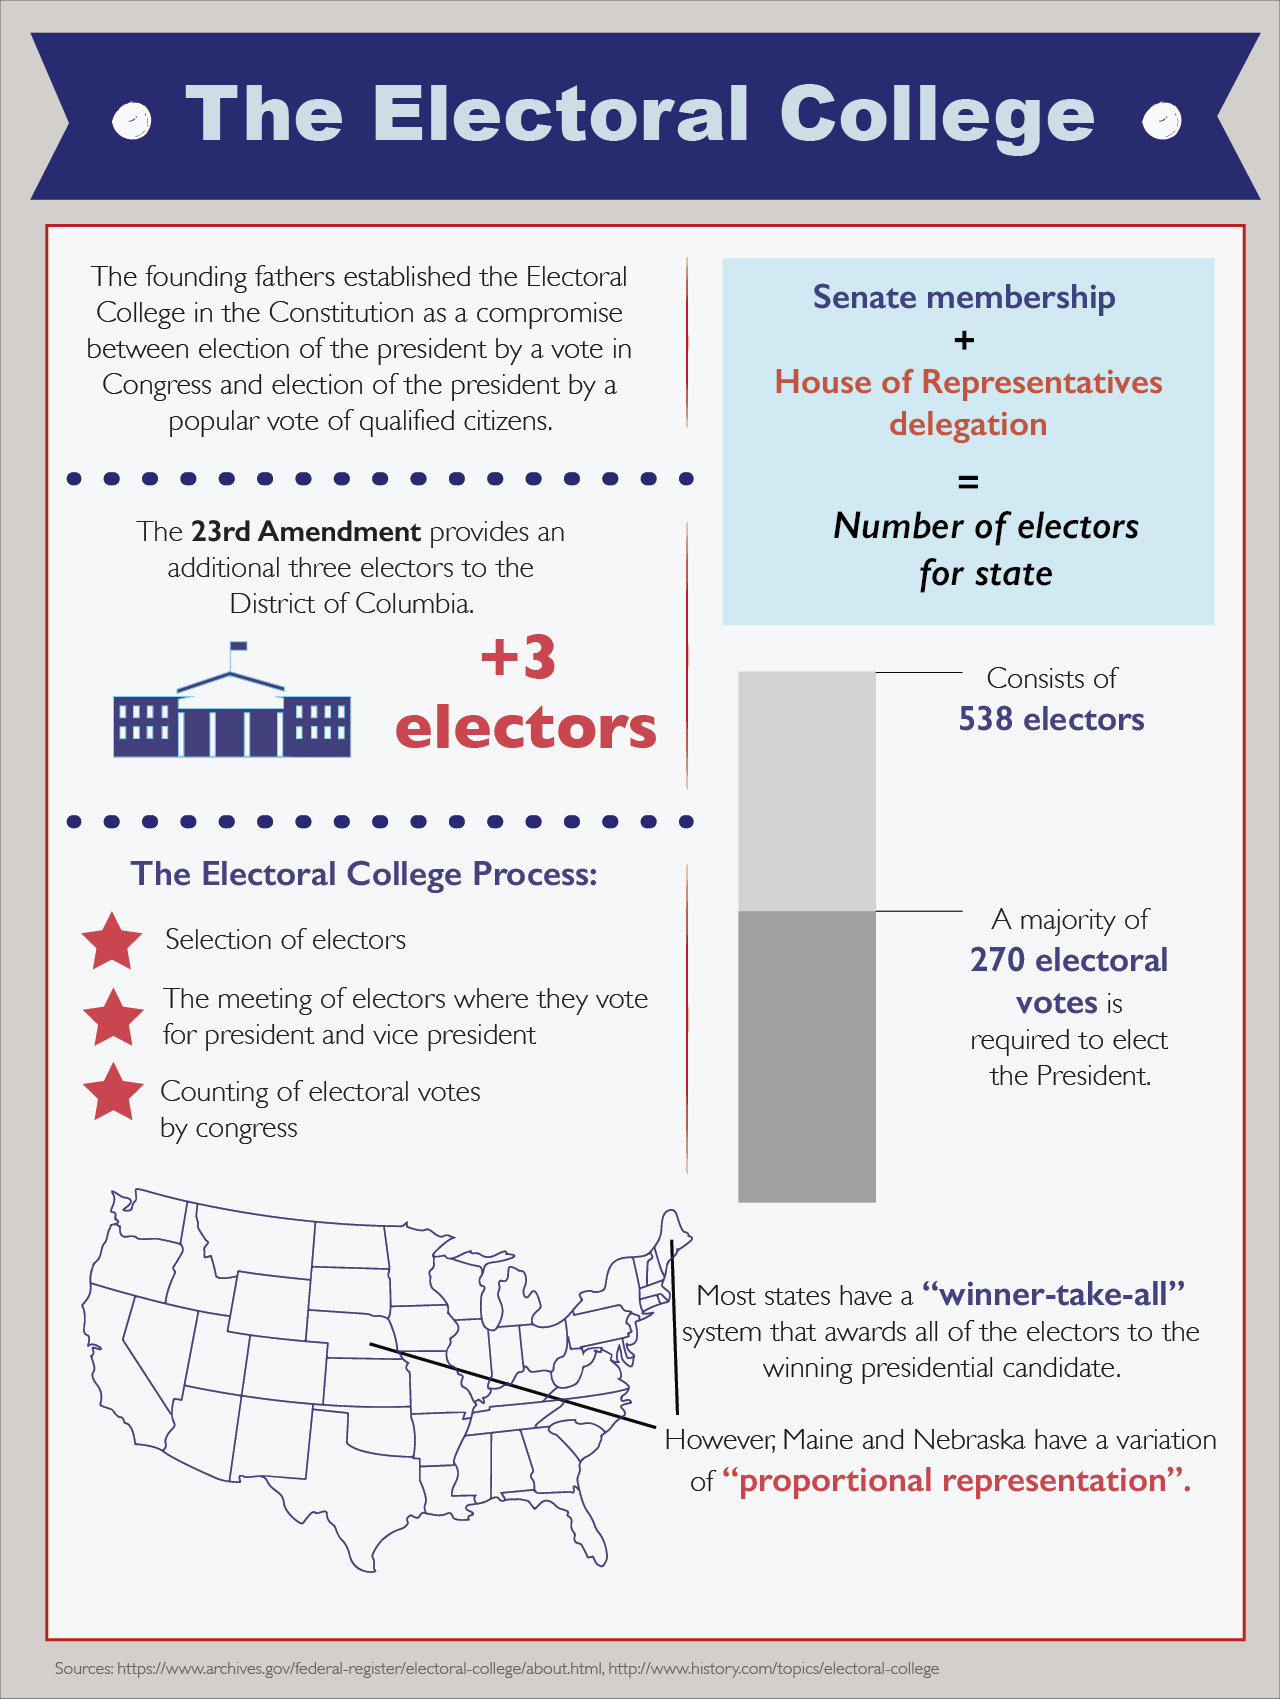 summary of how the electoral college works